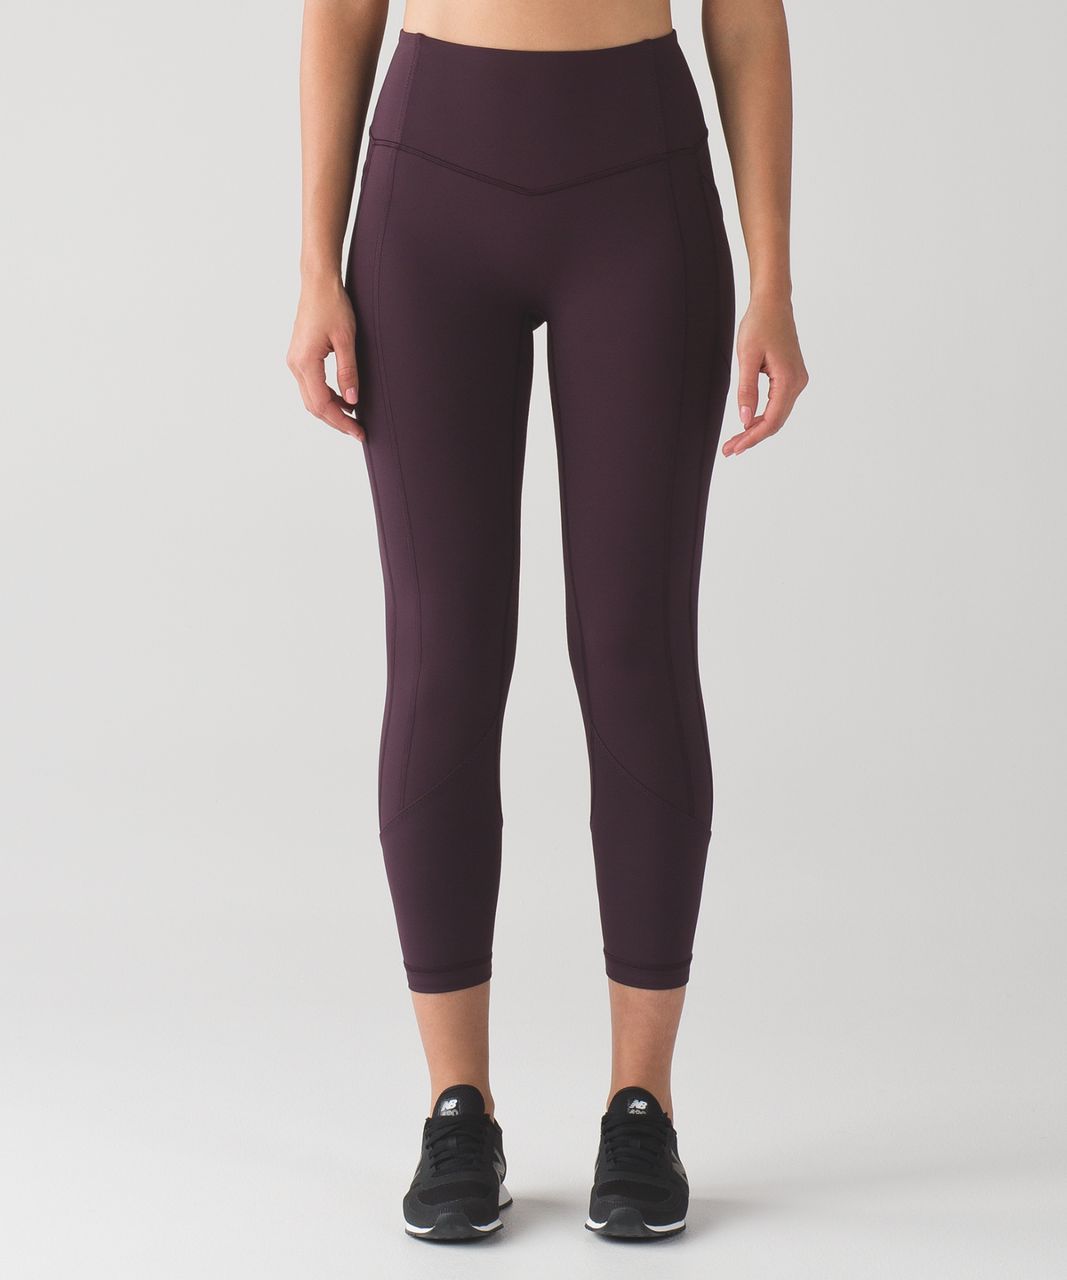 Lululemon All The Right Places Crop II *23" - Black Cherry